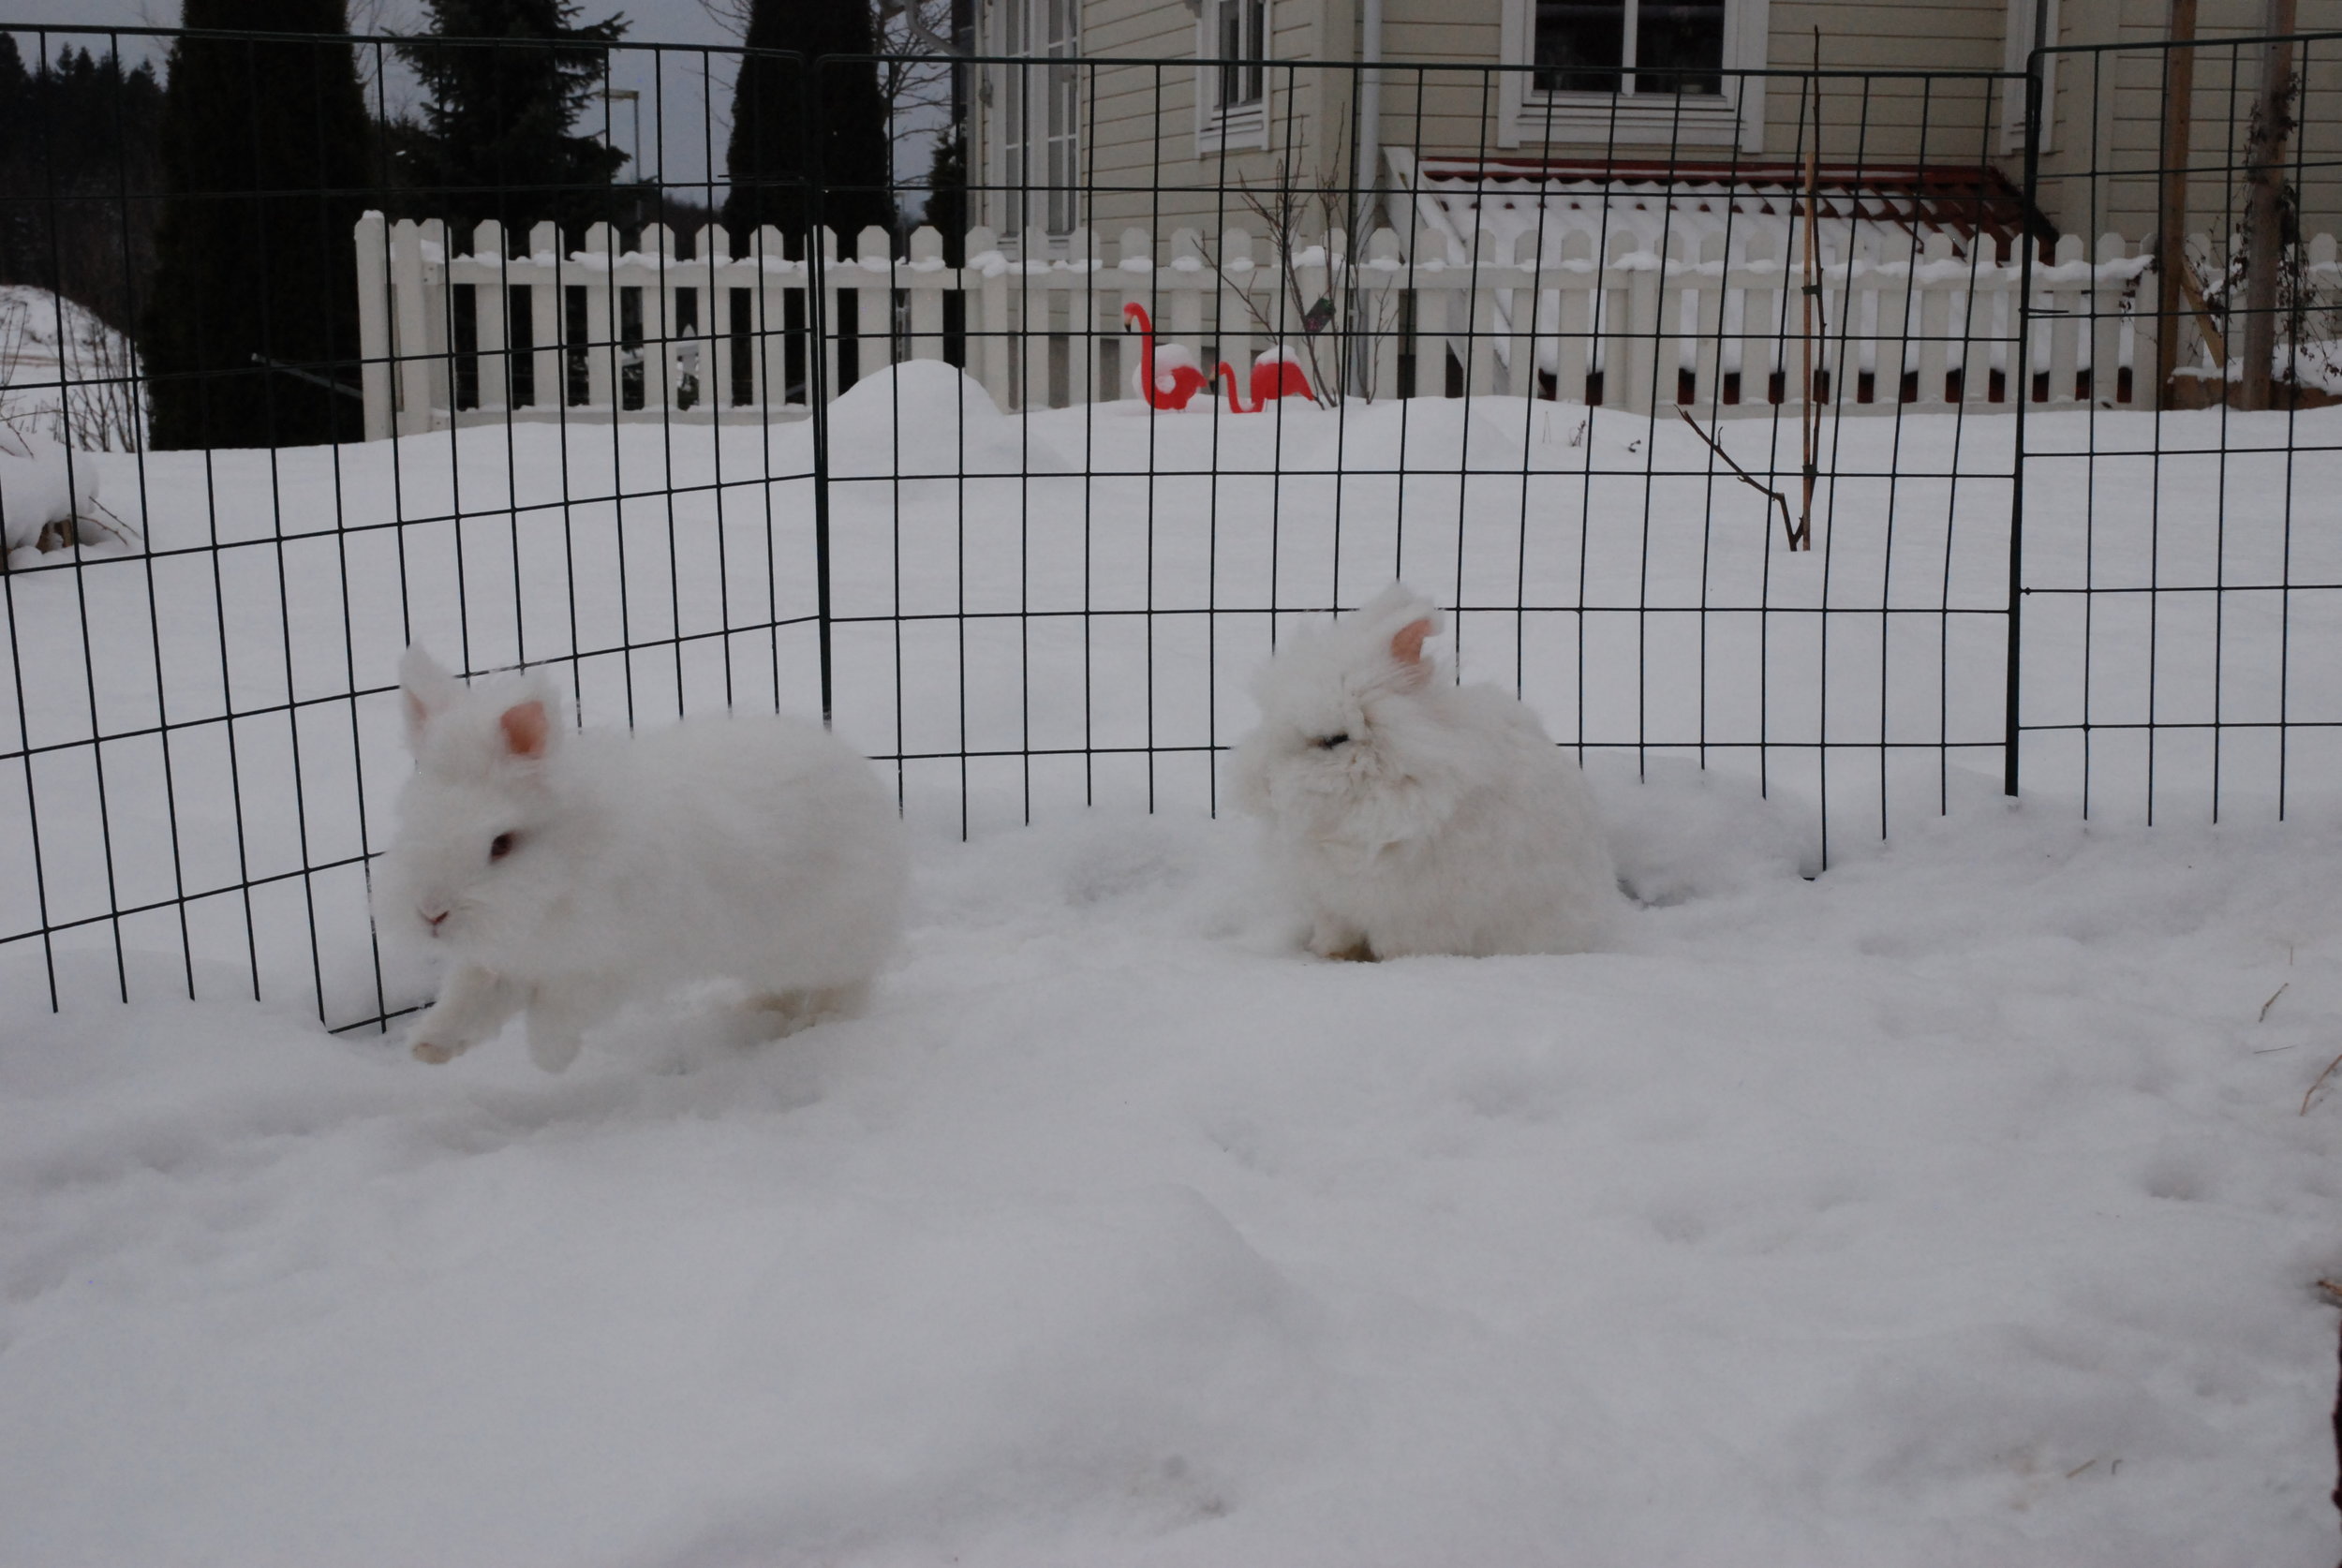 Where Does the Snow End and the Bunny Begin? 1